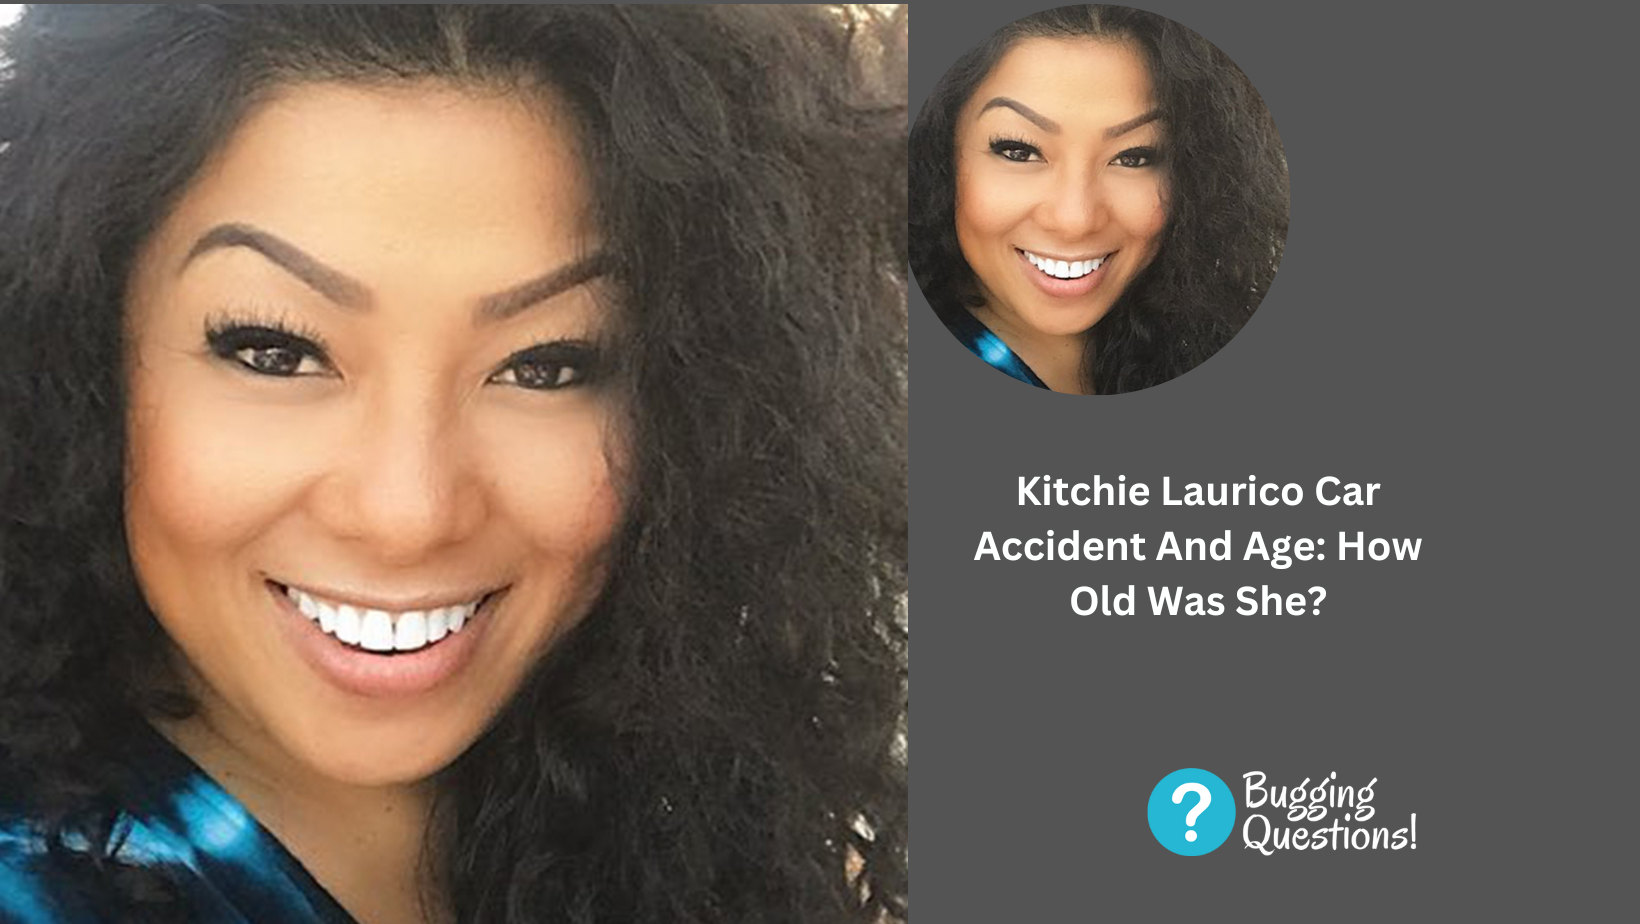 Kitchie Laurico Car Accident And Age: How Old Was She?